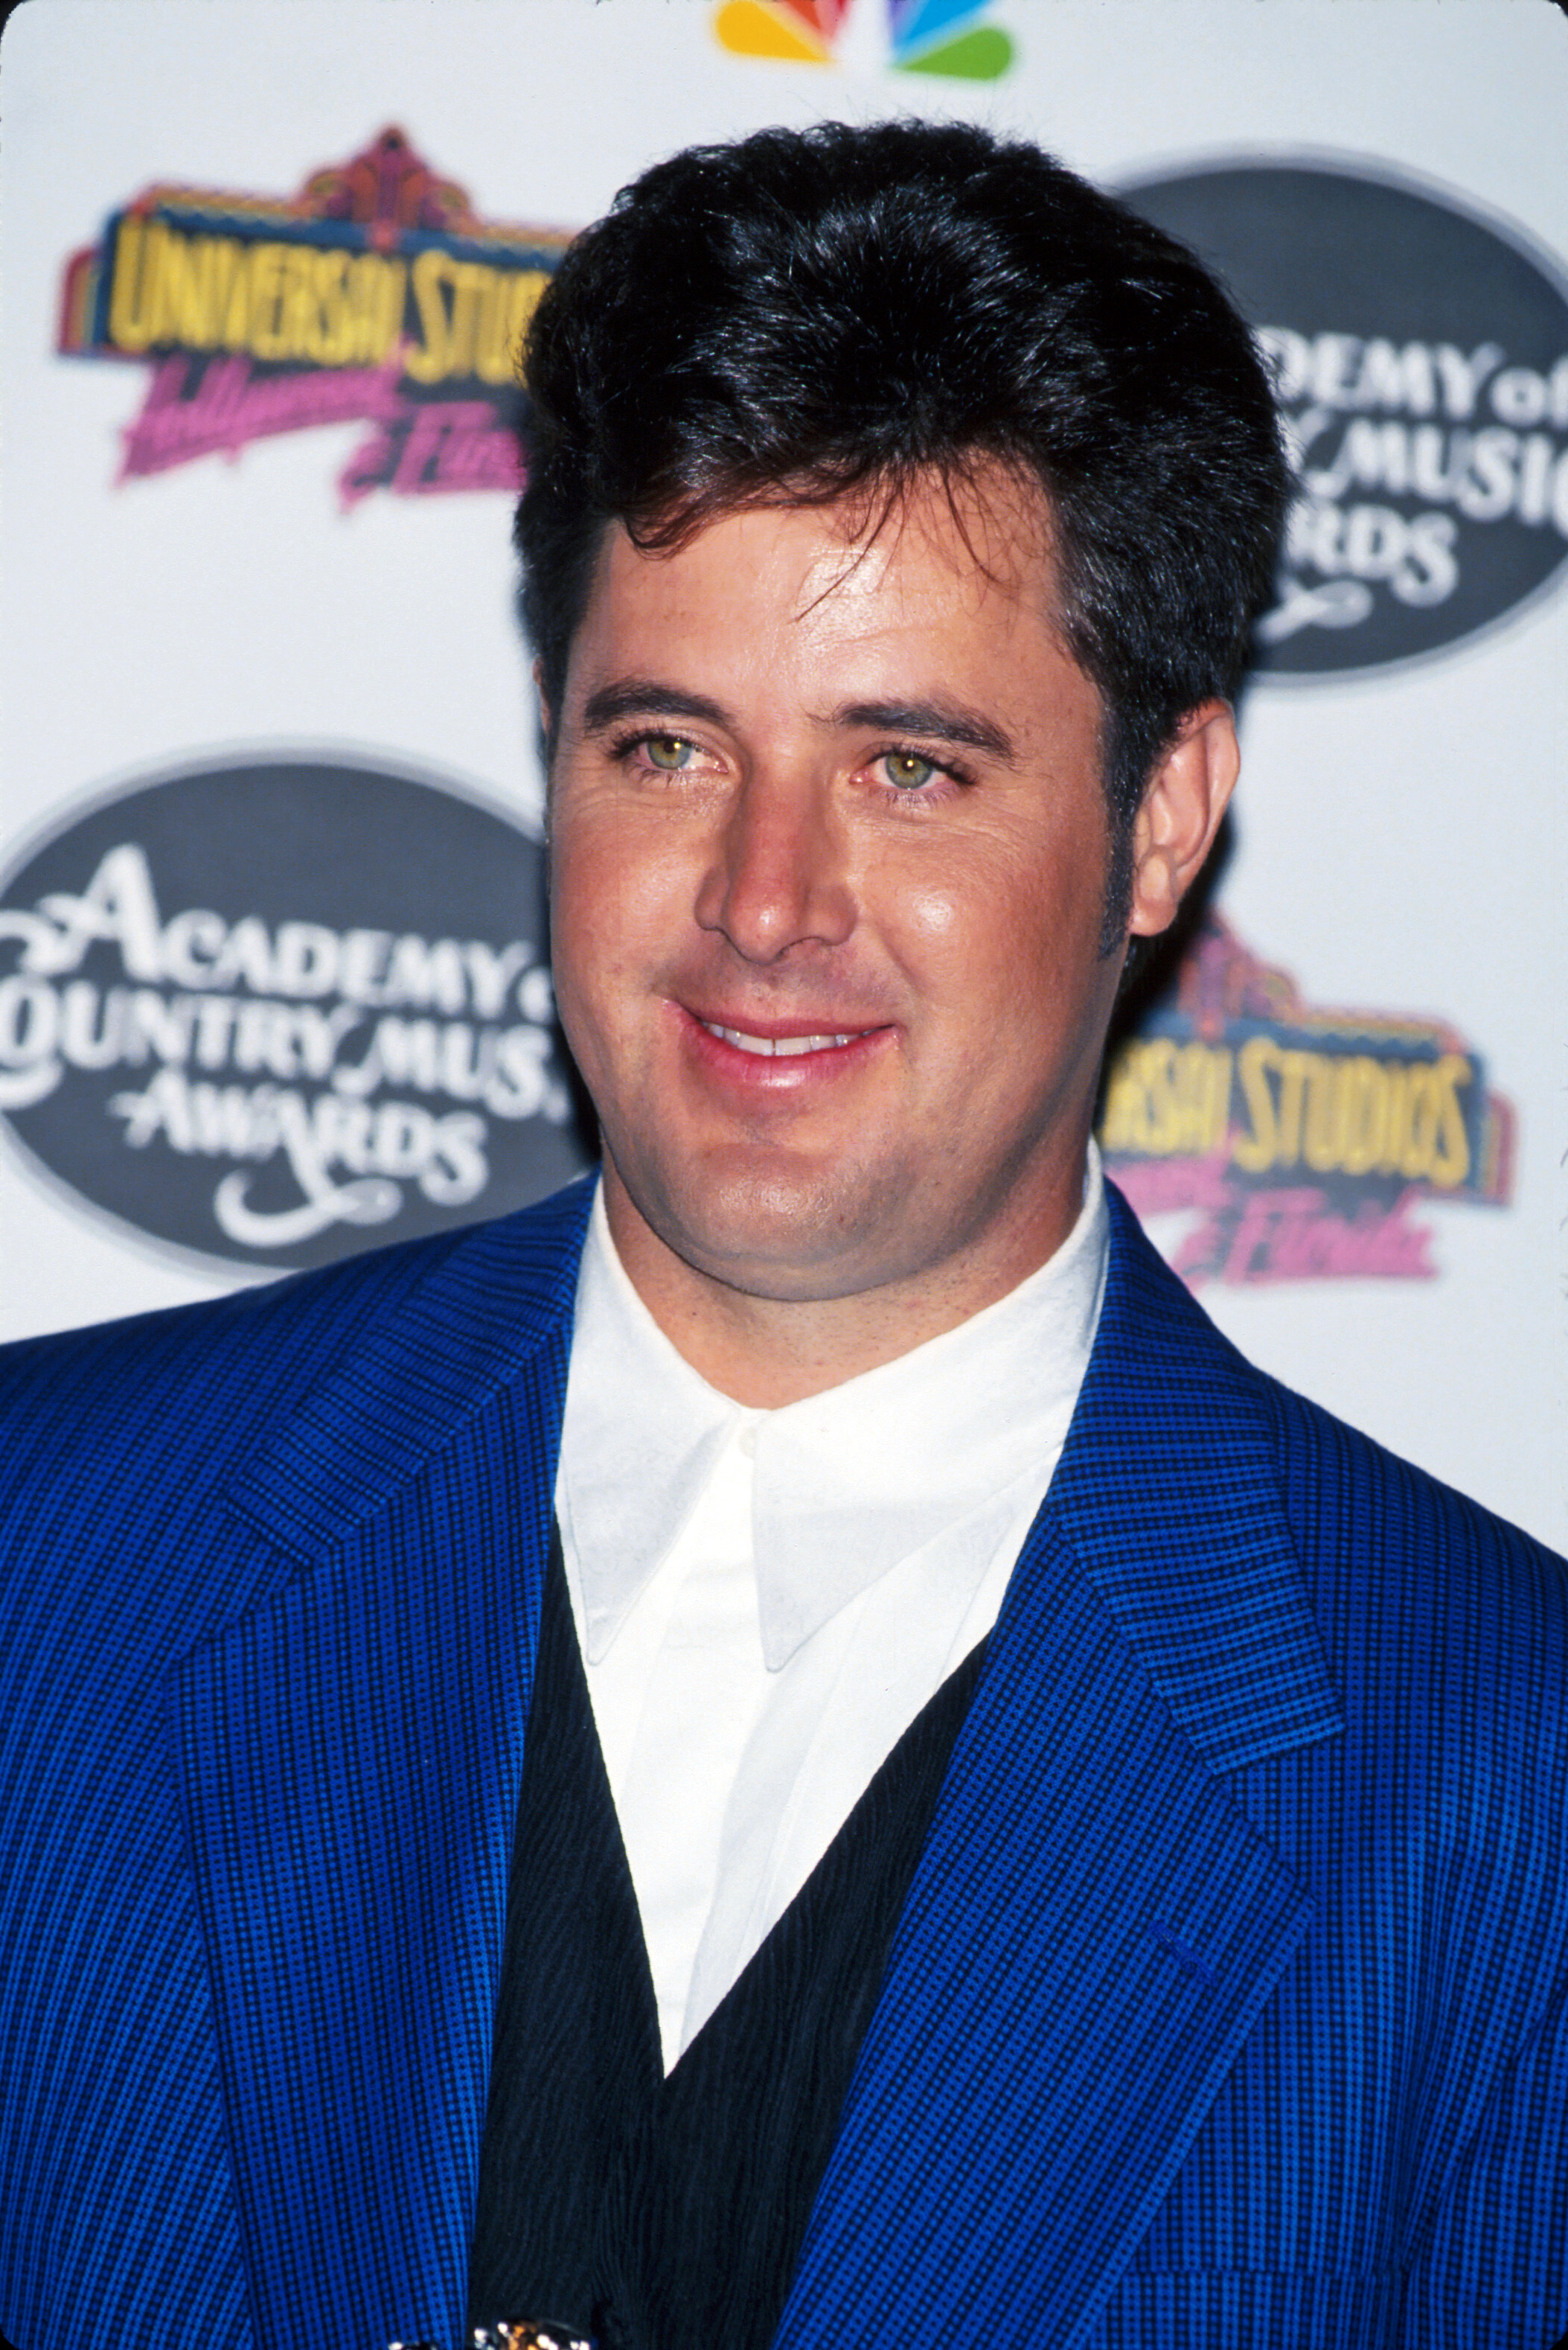 Vince Gill alive and kicking